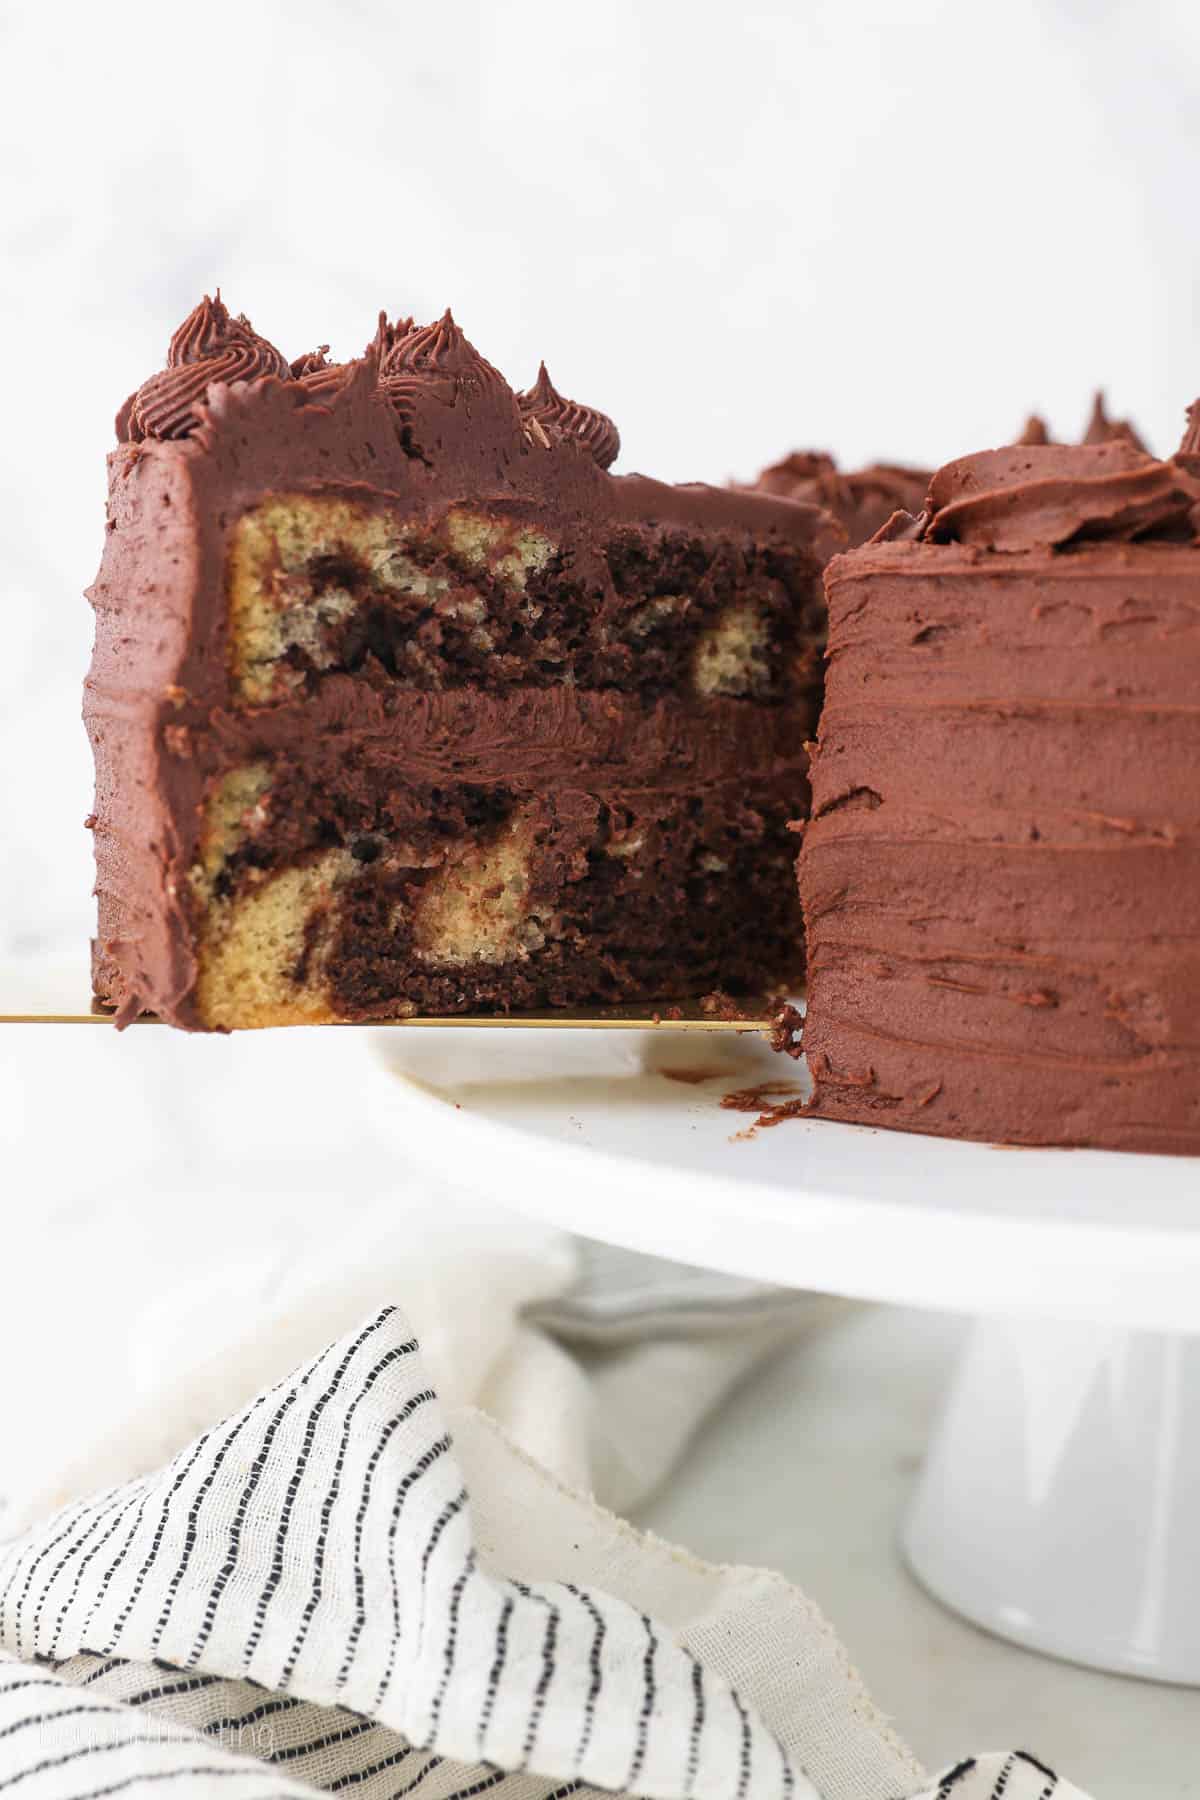 A slice of frosted marble cake is lifted from the rest of the cake on a white cake stand.